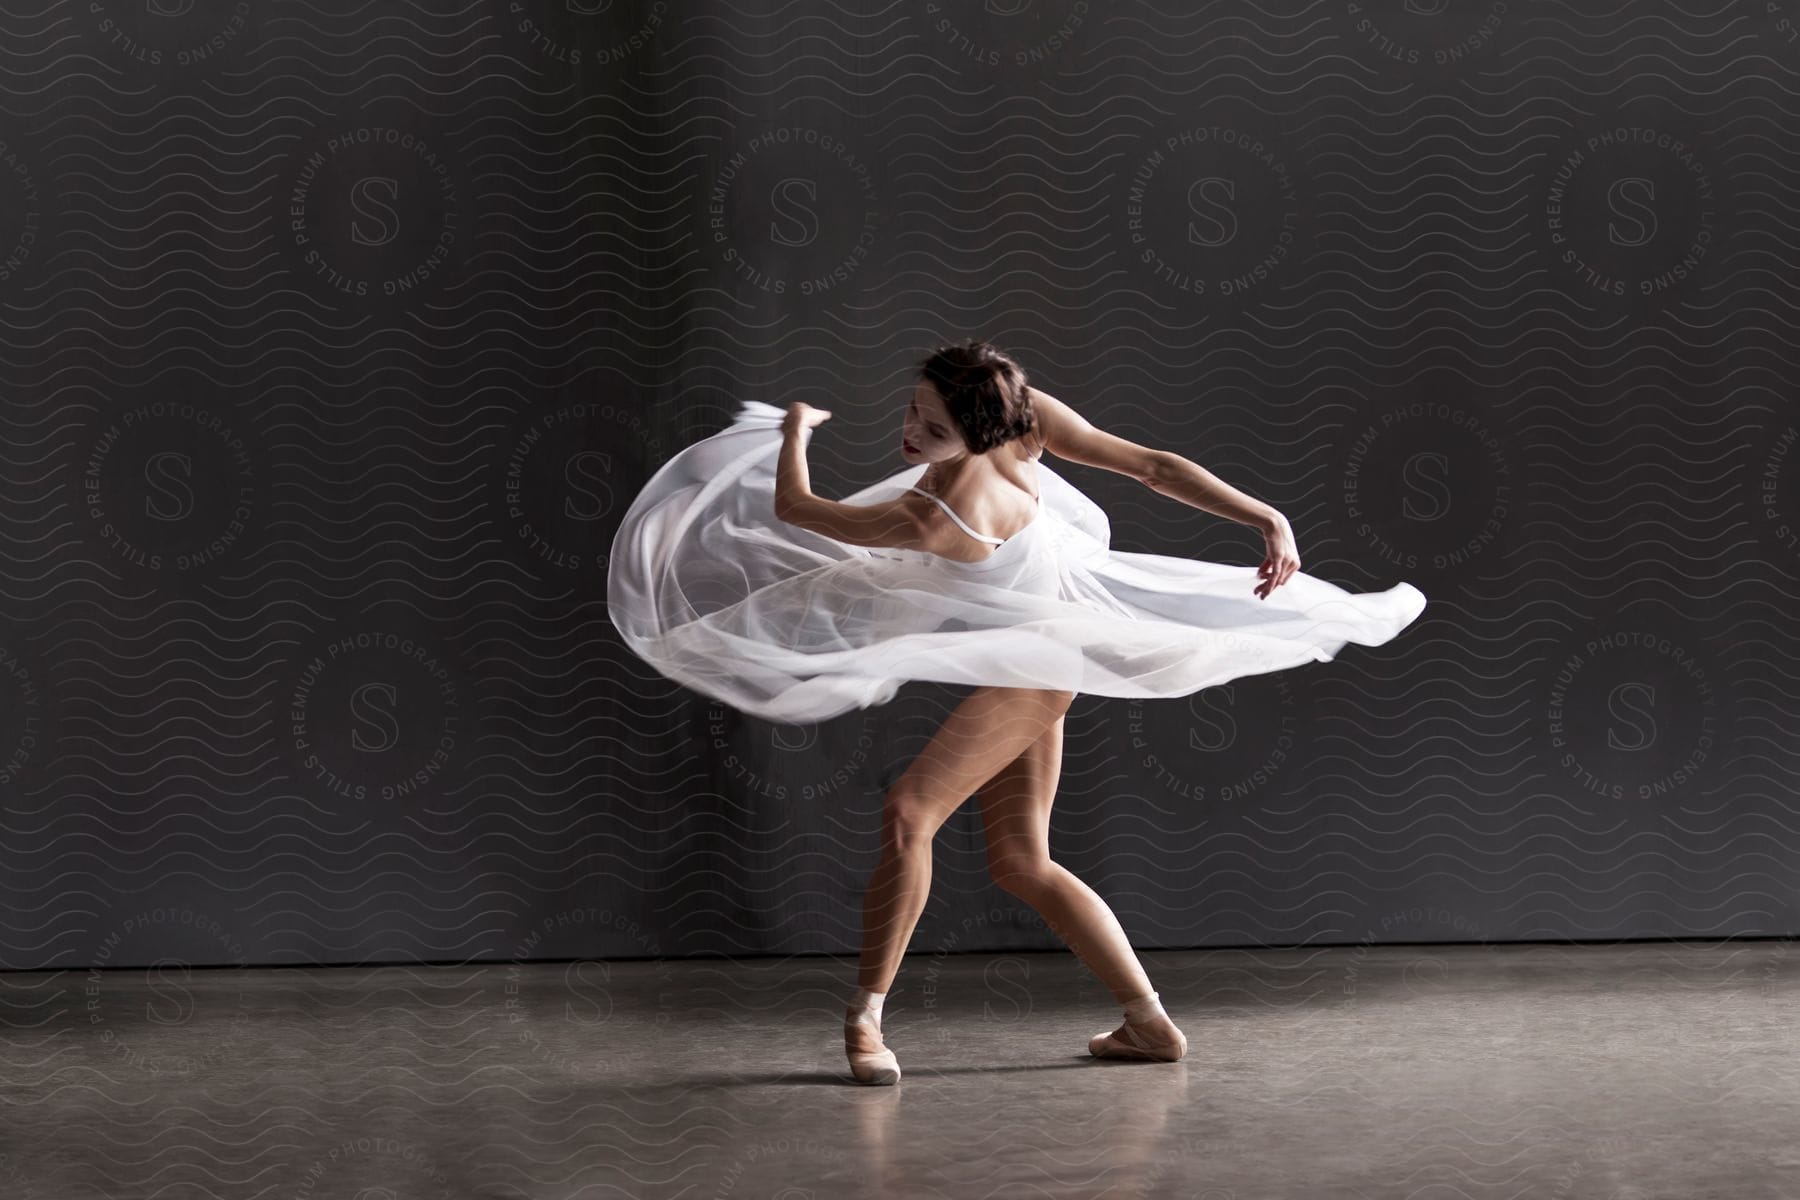 A woman dancing gracefully in an empty room